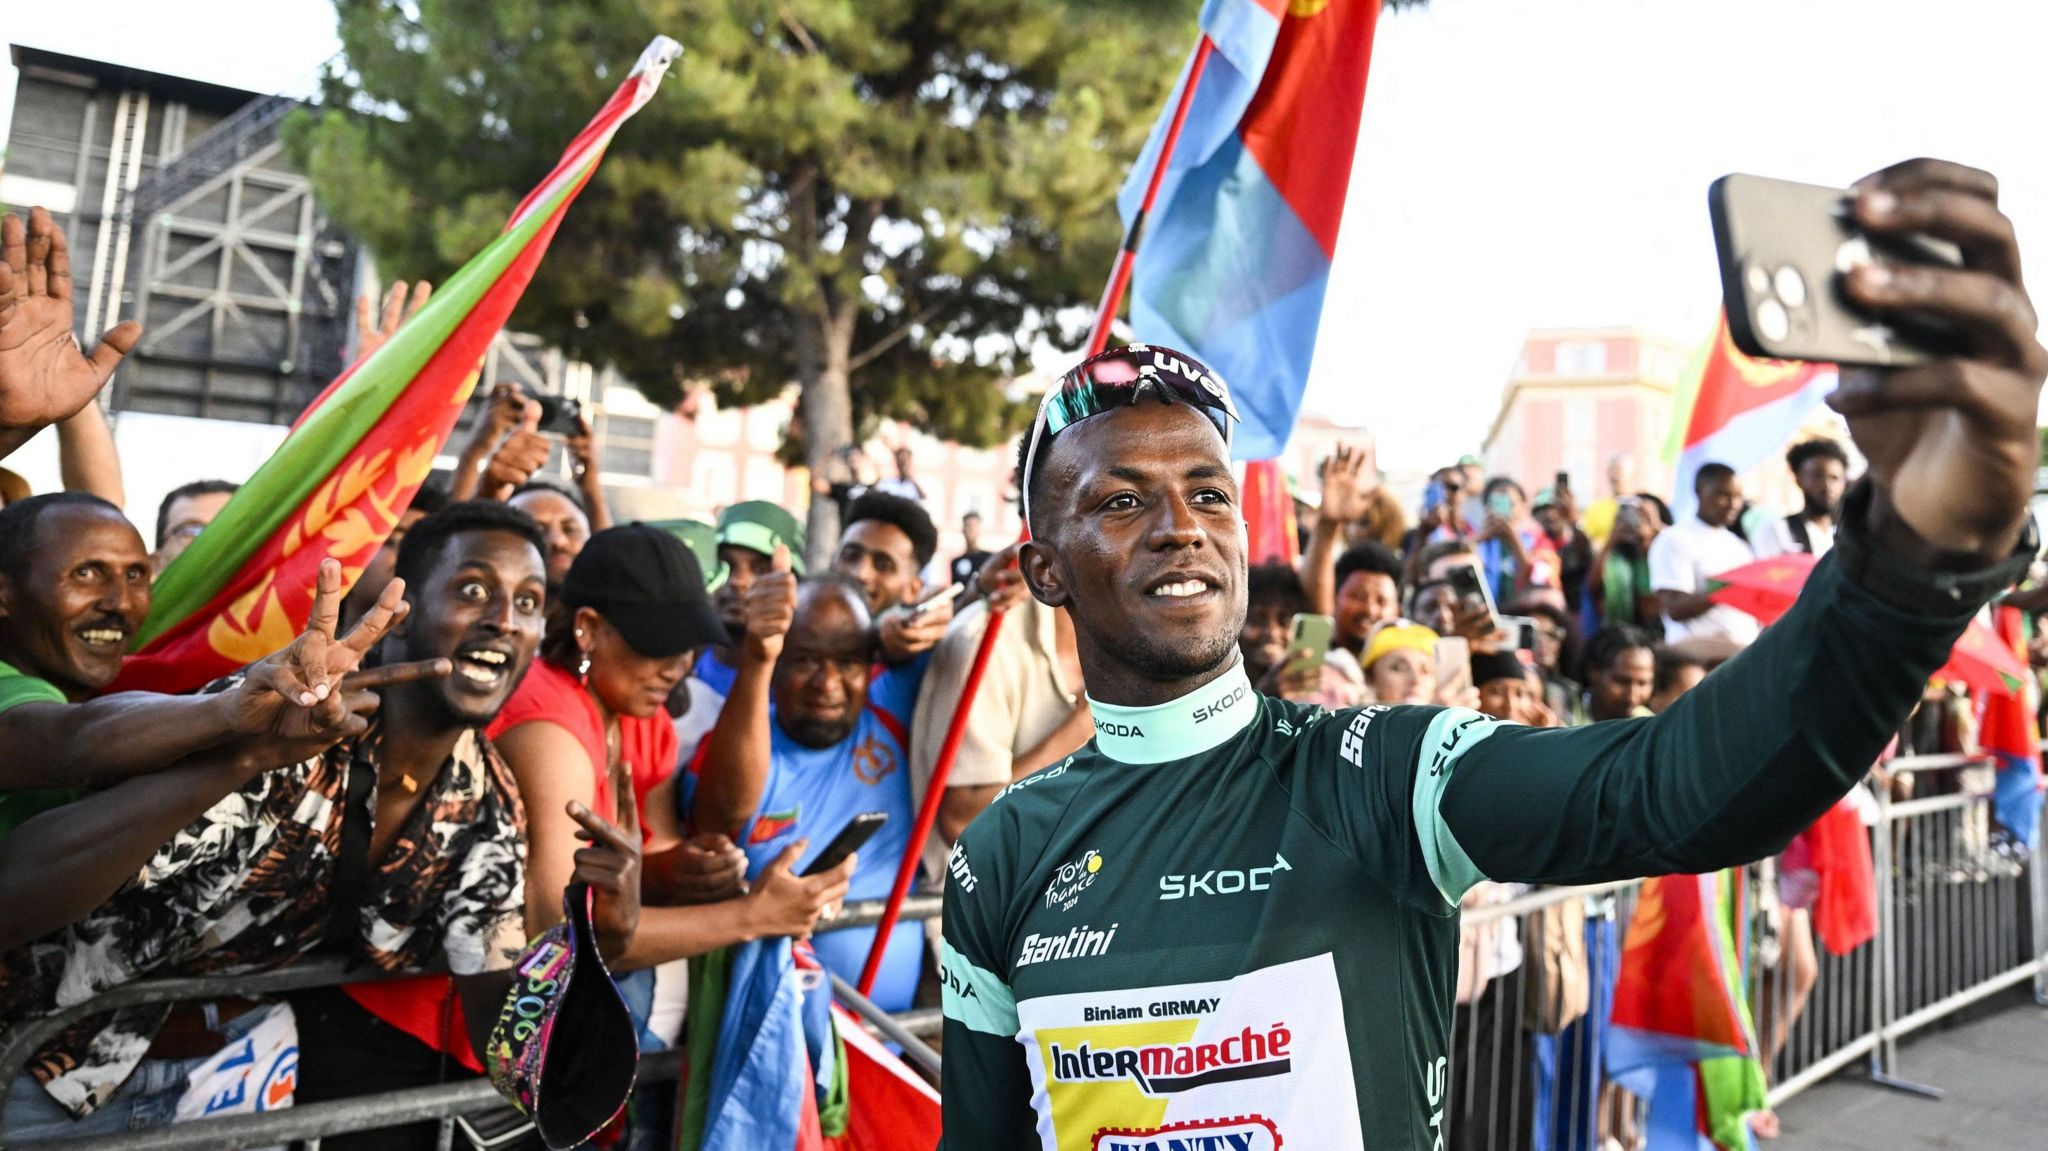 Biniam Girmay takes a selfie with fans from Eritrea who are holding flags